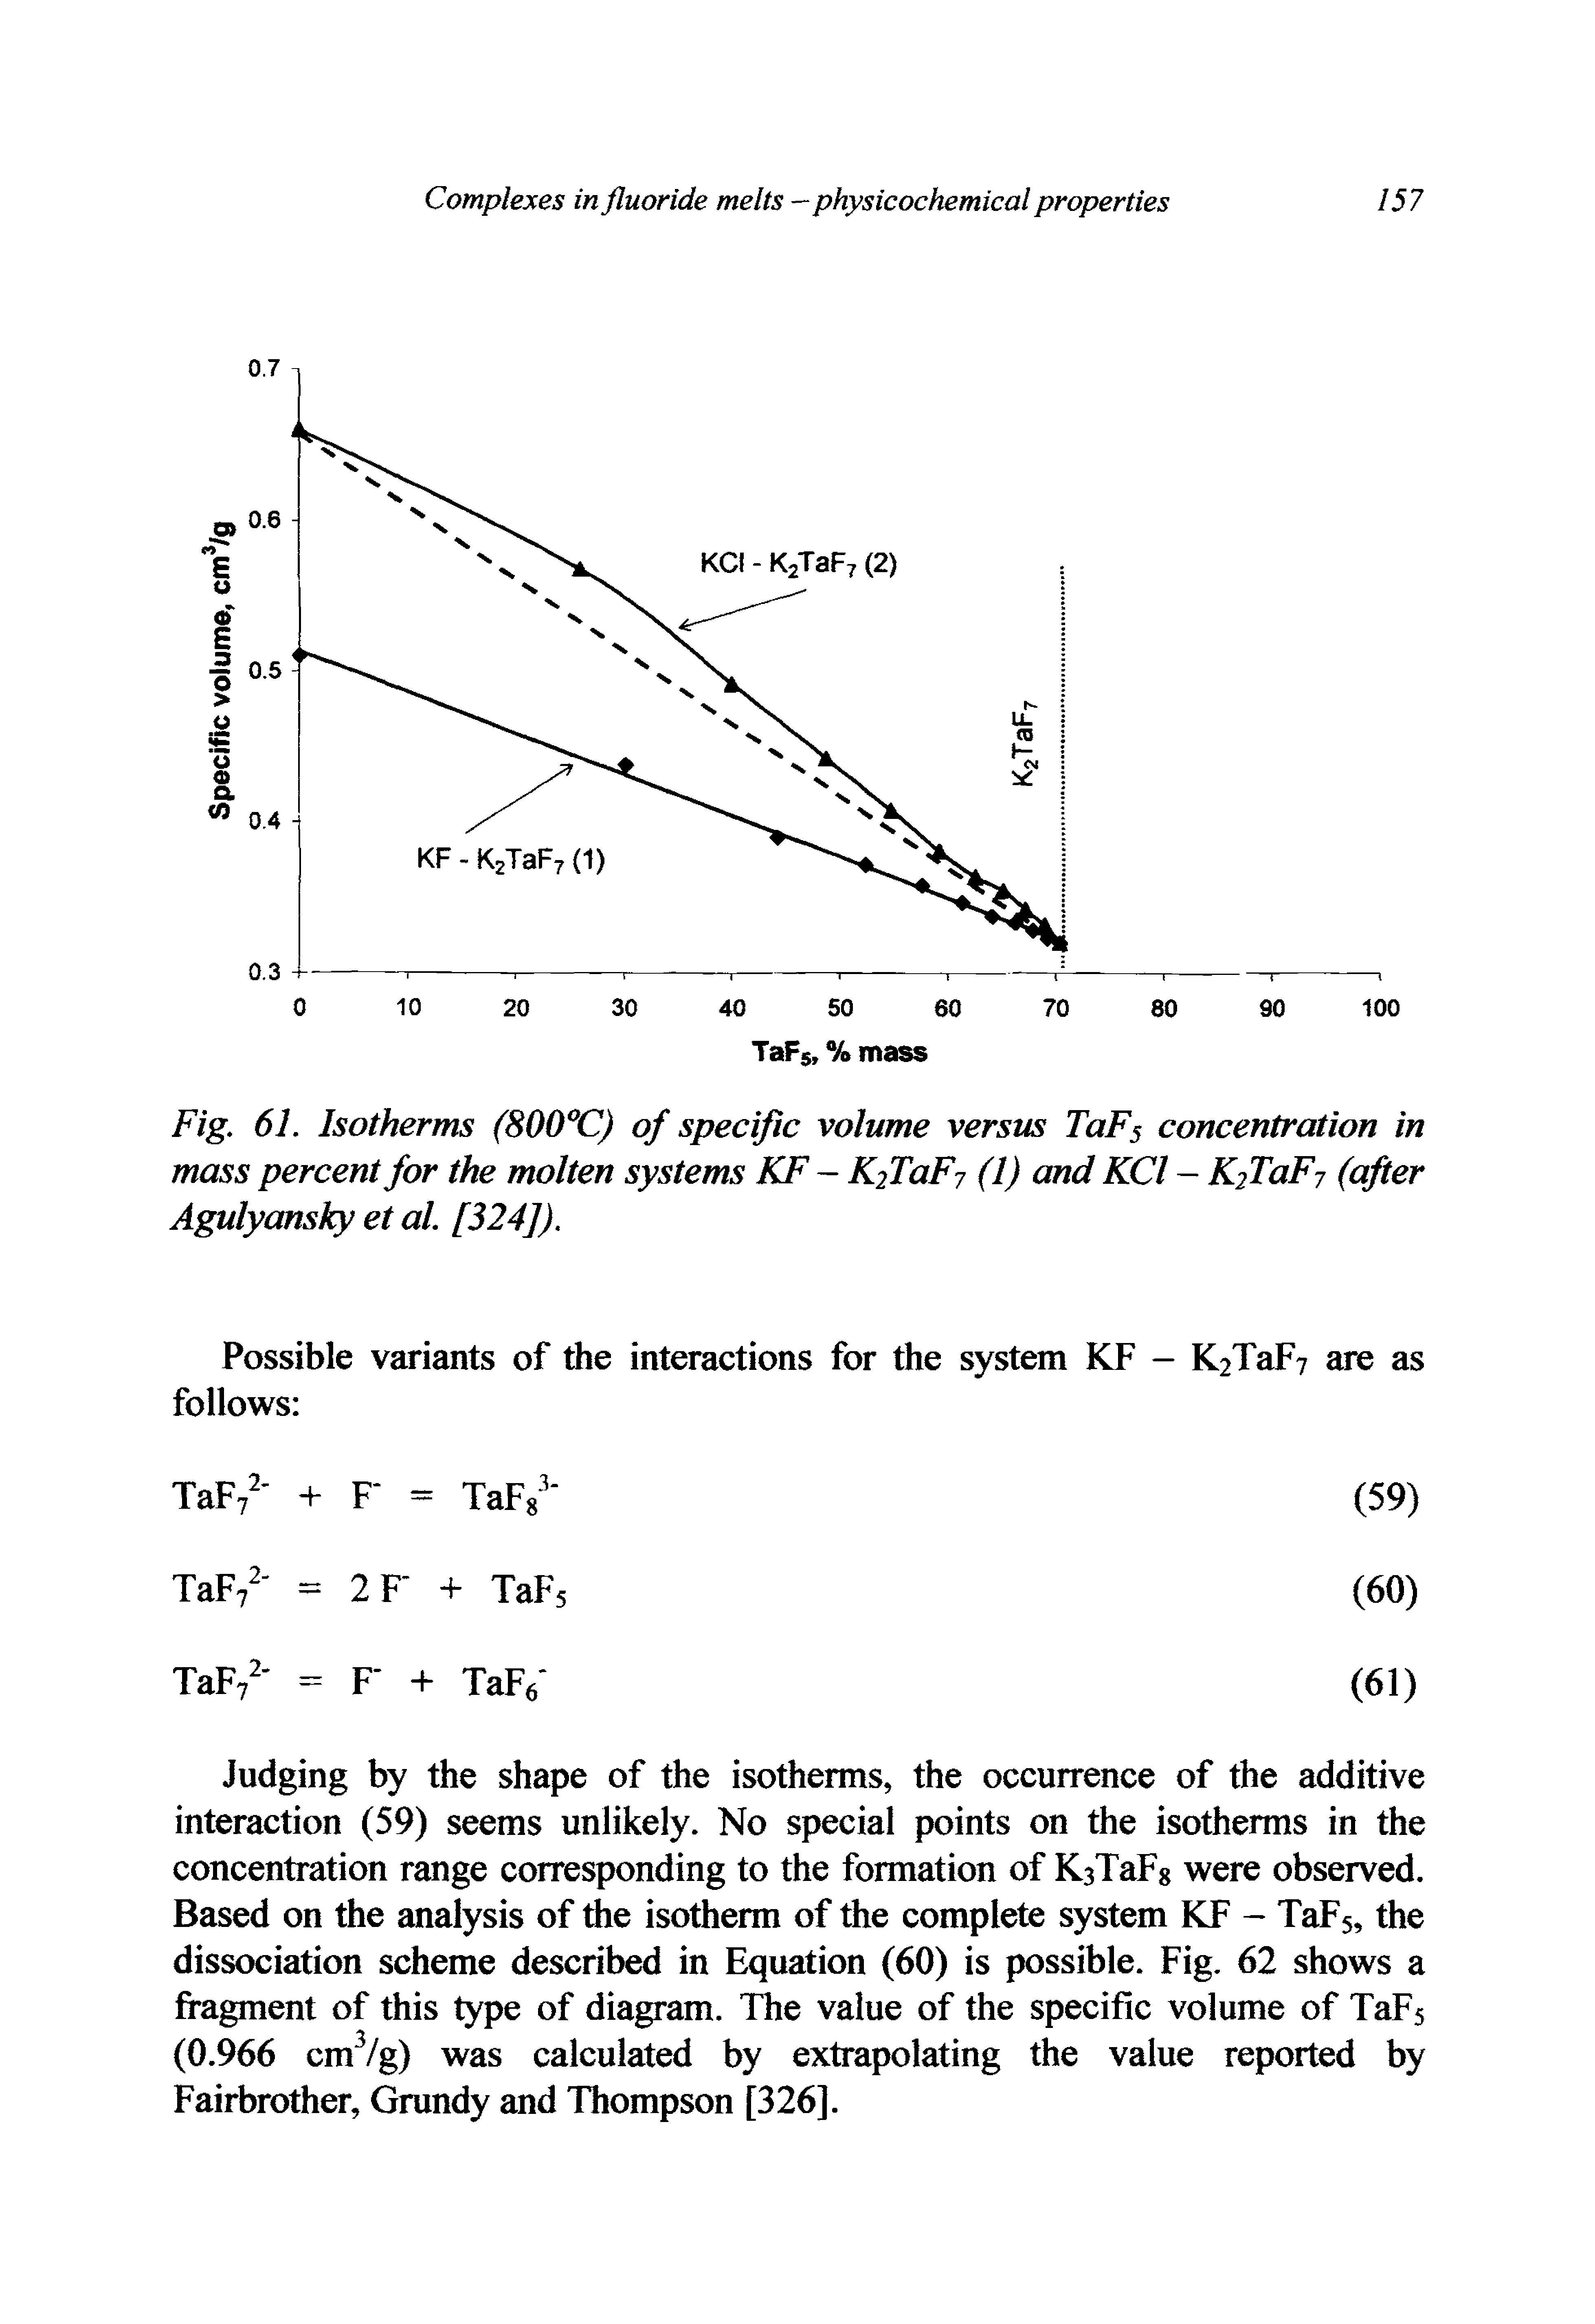 Fig. 61. Isotherms (800°C) of specific volume versus TaFs concentration in mass percent for the molten systems KF - KfTaFj (1) and KCl - KfFaFj (after Agulyansky et al. [324]).